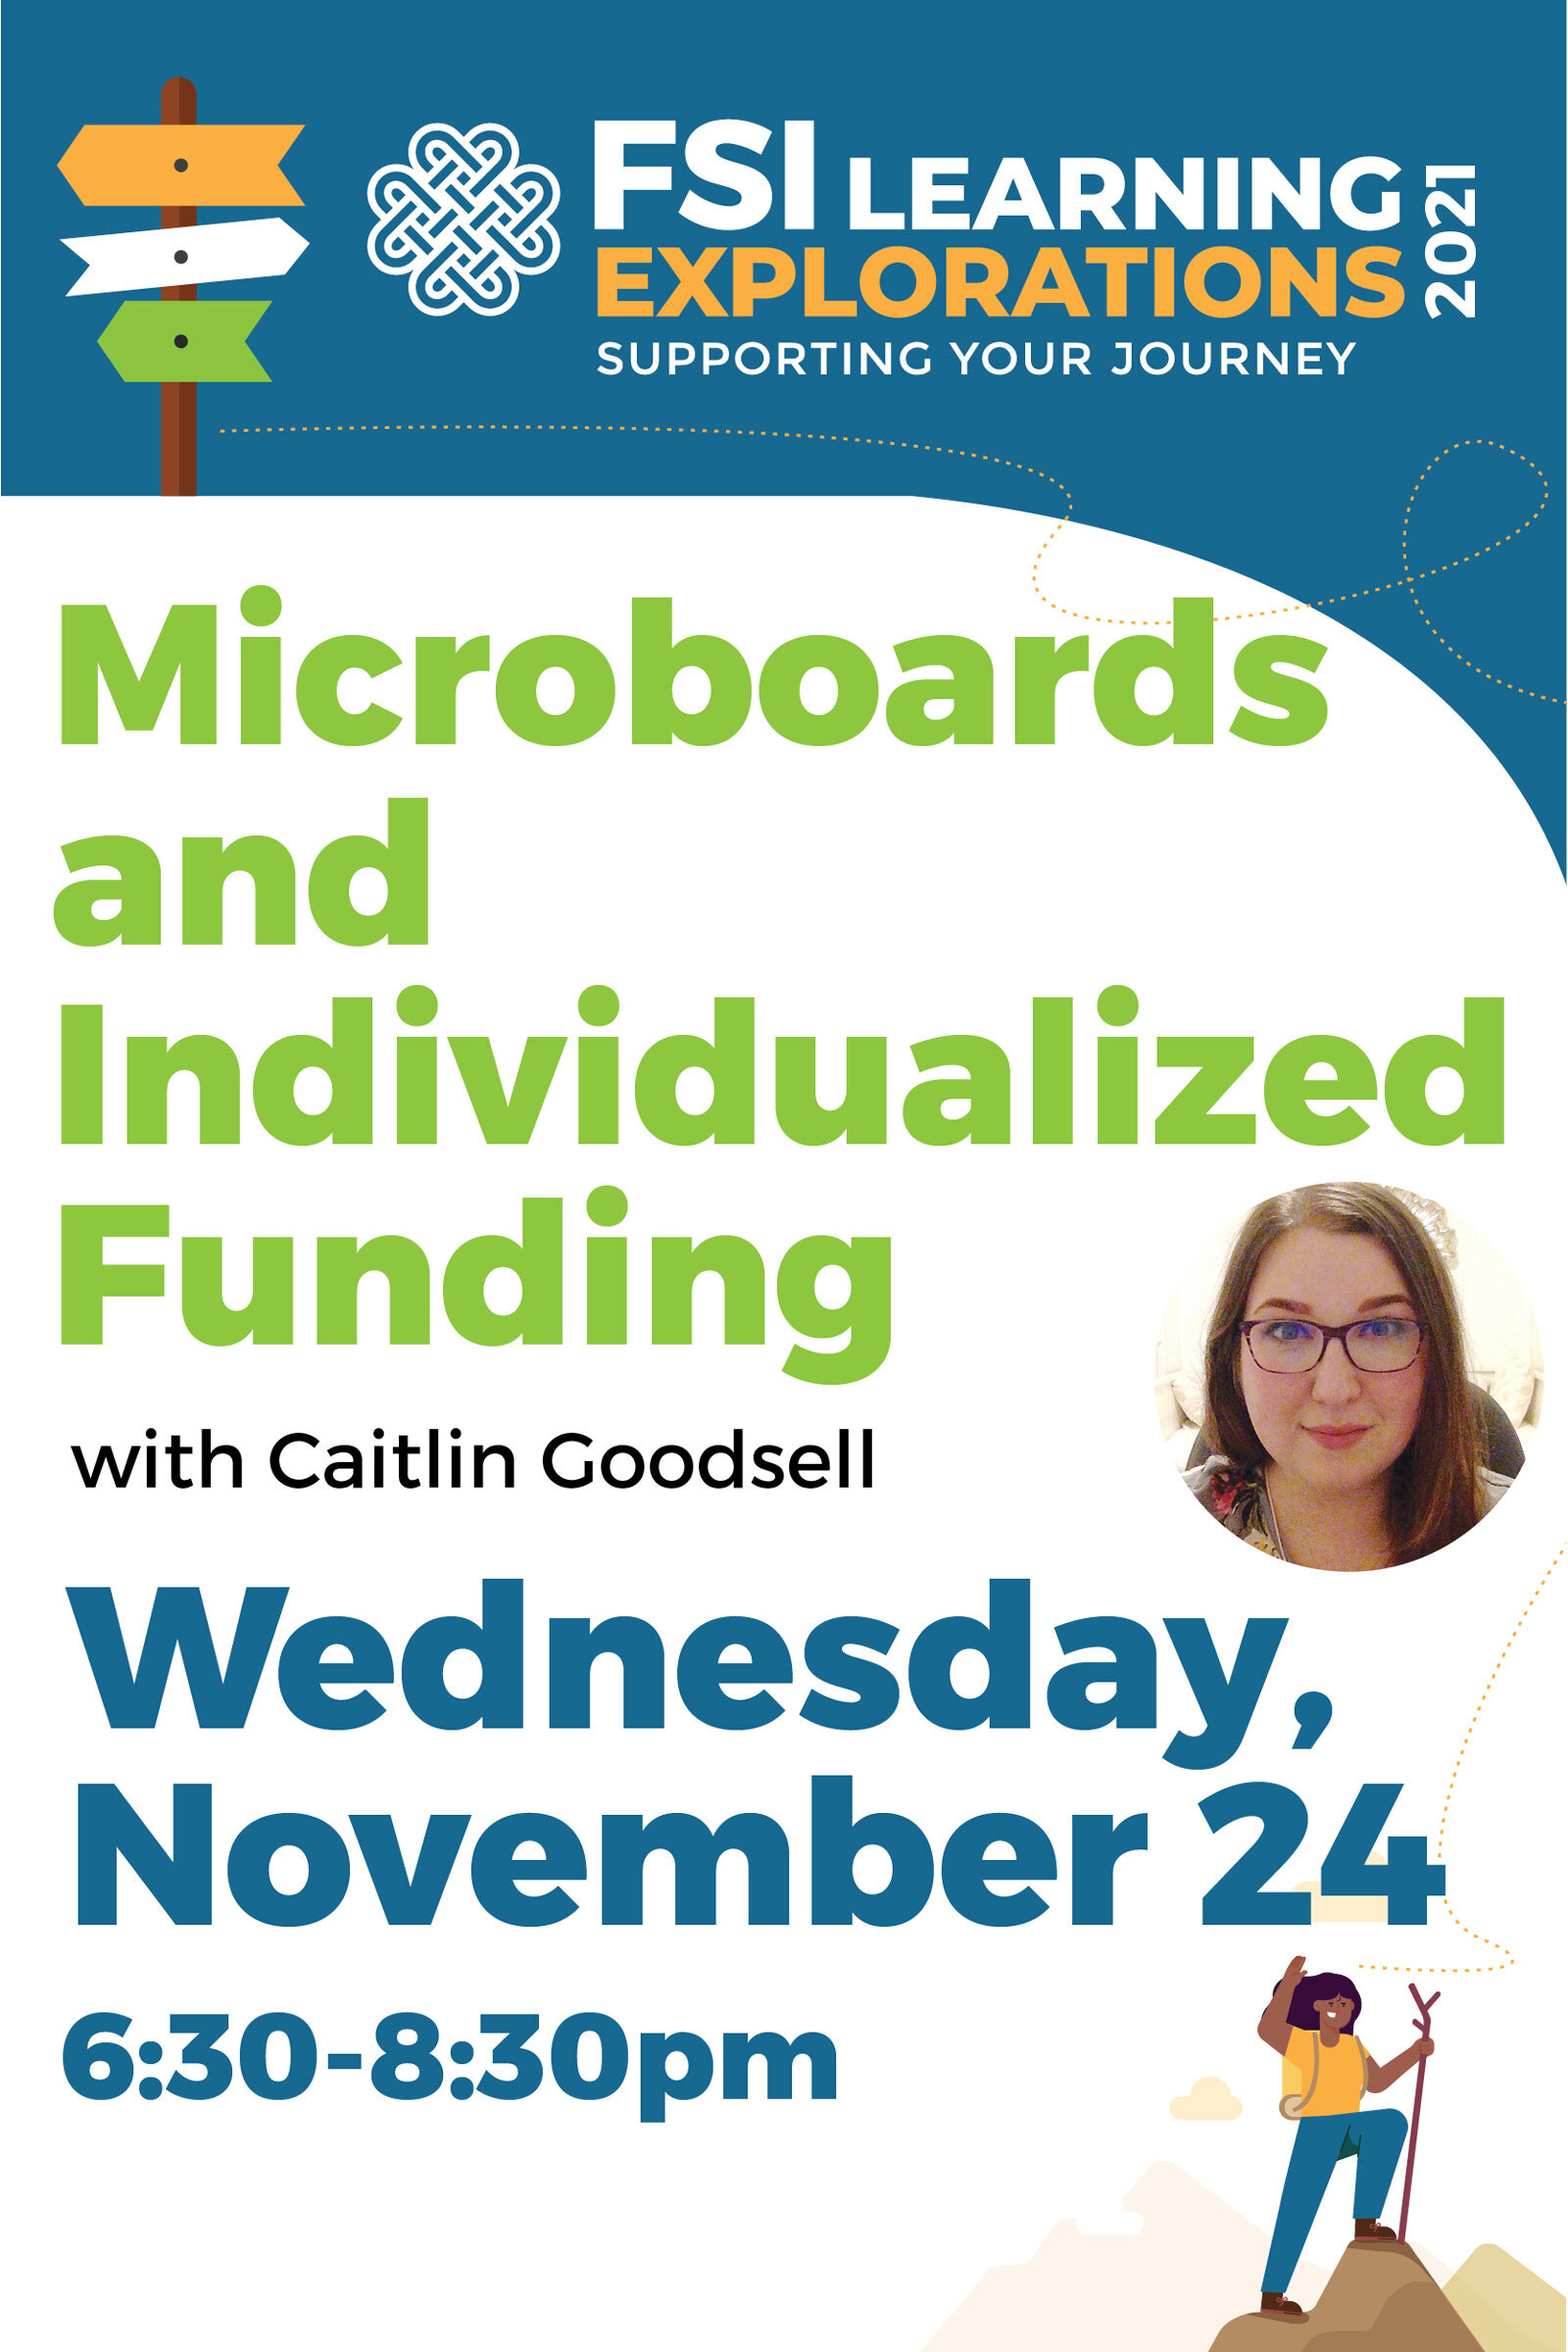 FSI Learning Explorations - Microboards and Individualized Funding